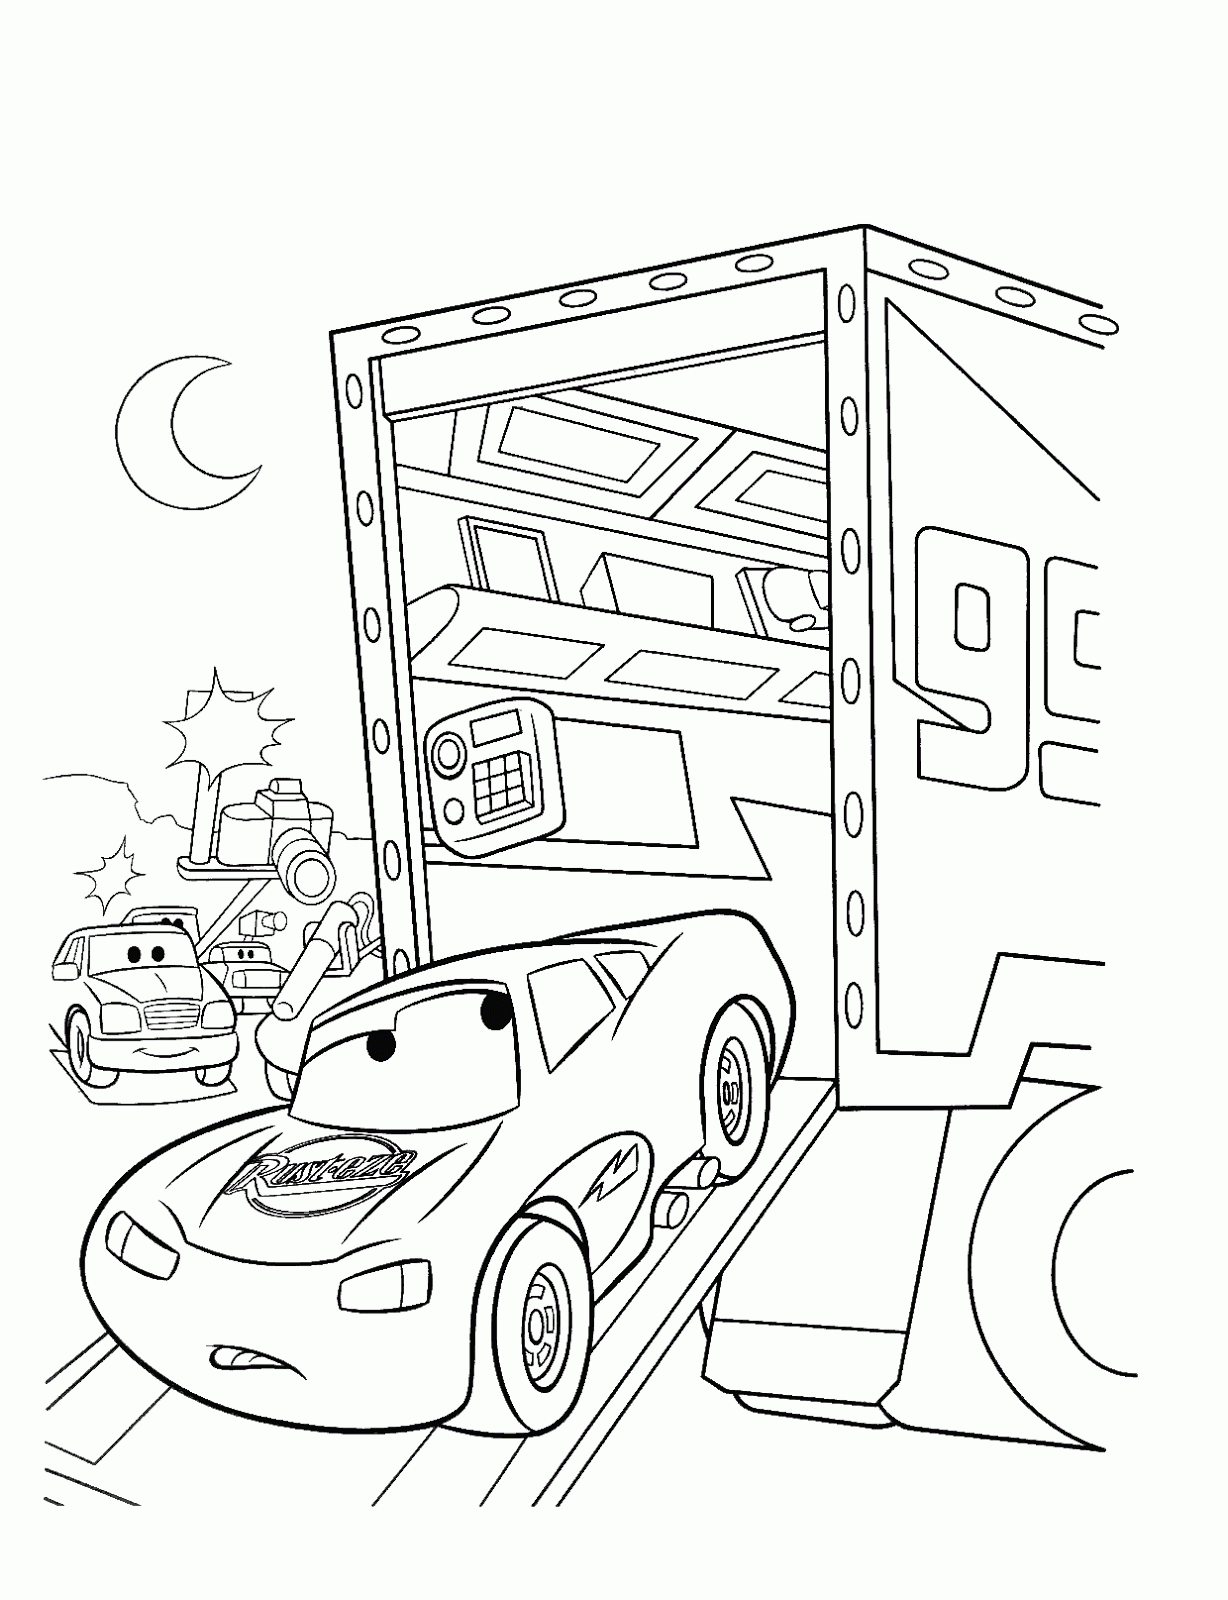 cars 1 coloring pages lightning mcqueen from cars from disney cars coloring page 1 coloring pages cars 